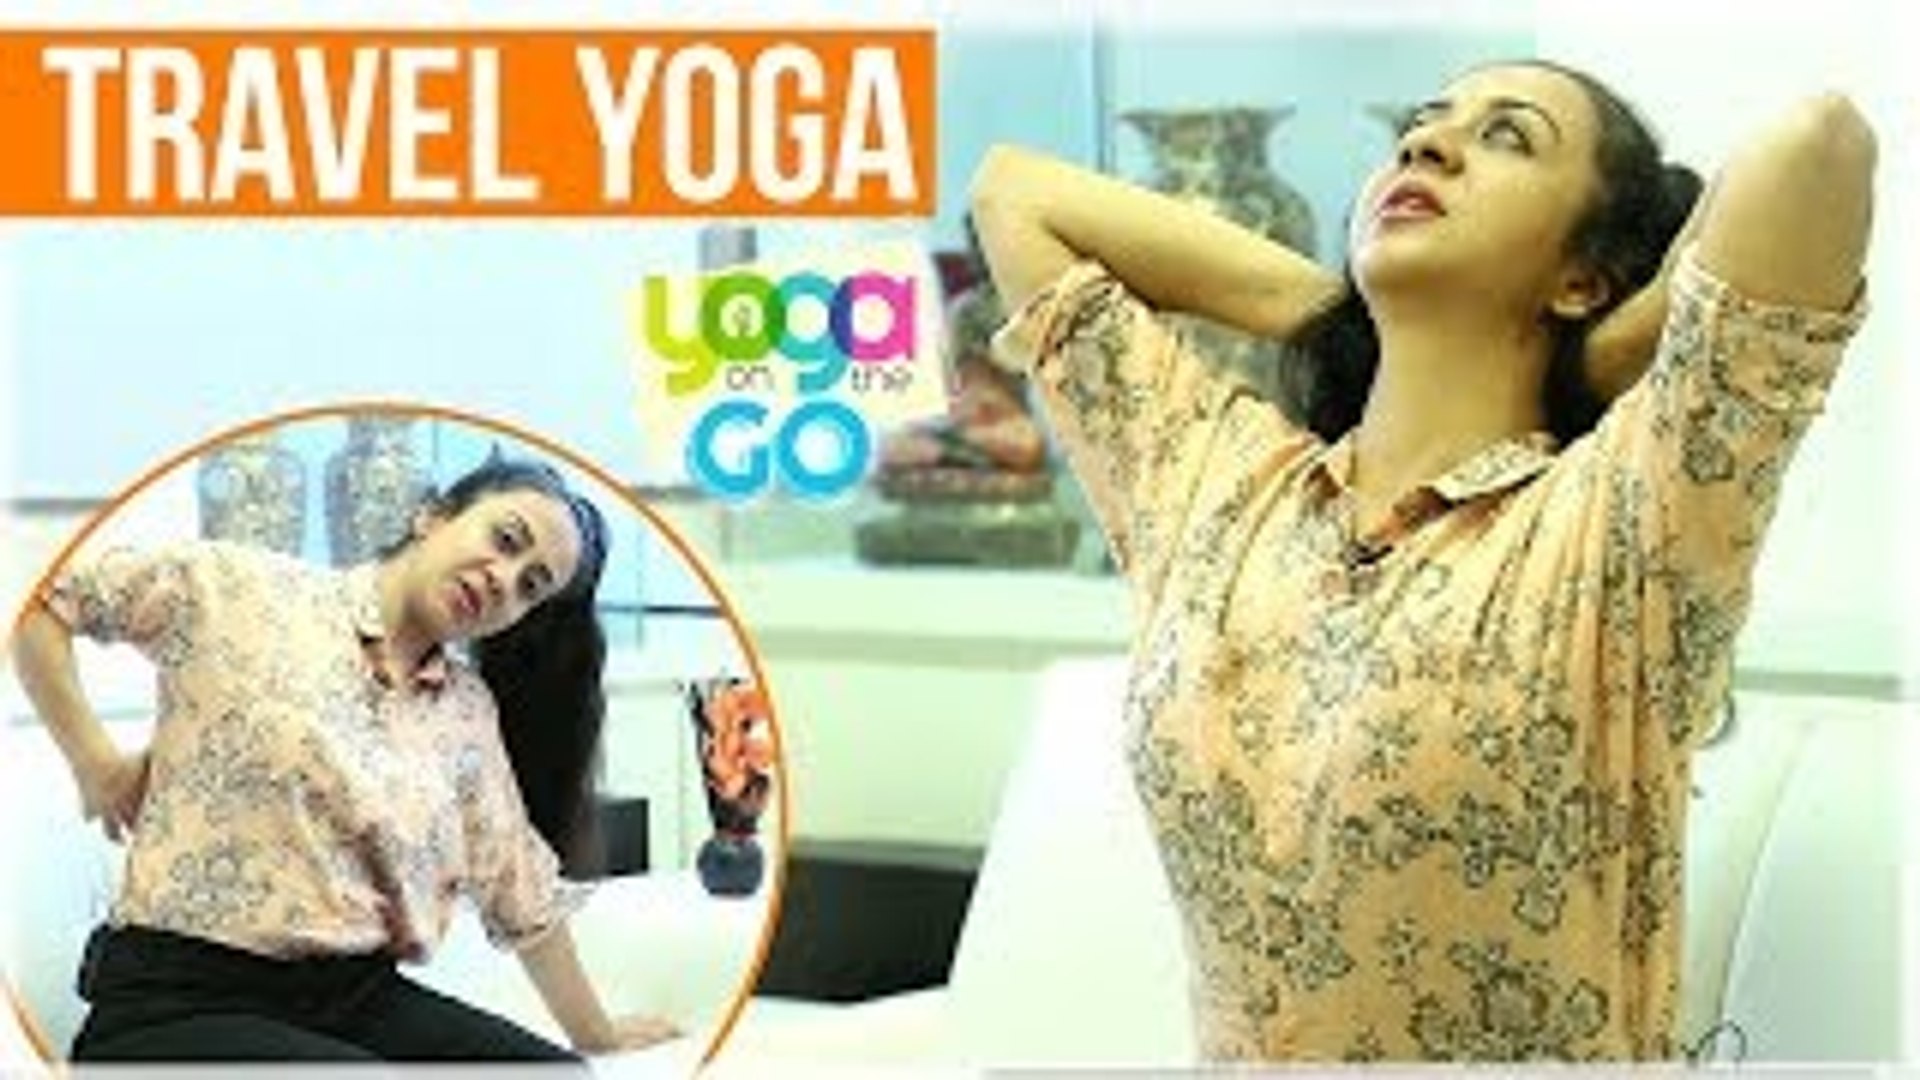 Travel Yoga Video | Yoga During Travel | Car Yoga | Yoga For Relief | Yoga On The Go With AJ